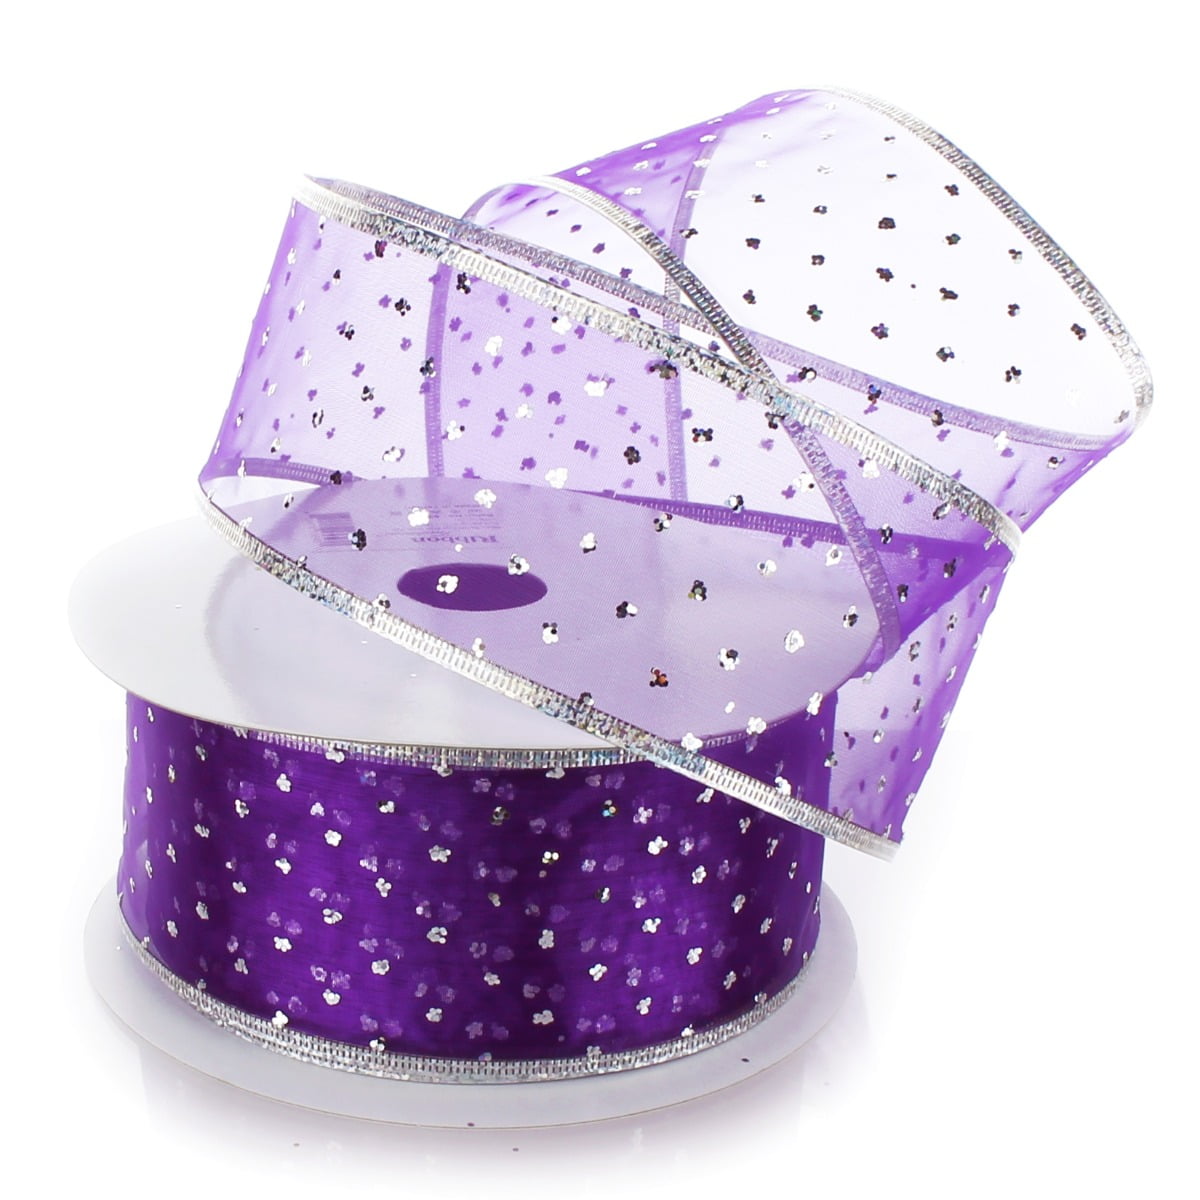 100 yard roll of Lavender wired ribbon, 1 1/2 inches wide, entire roll